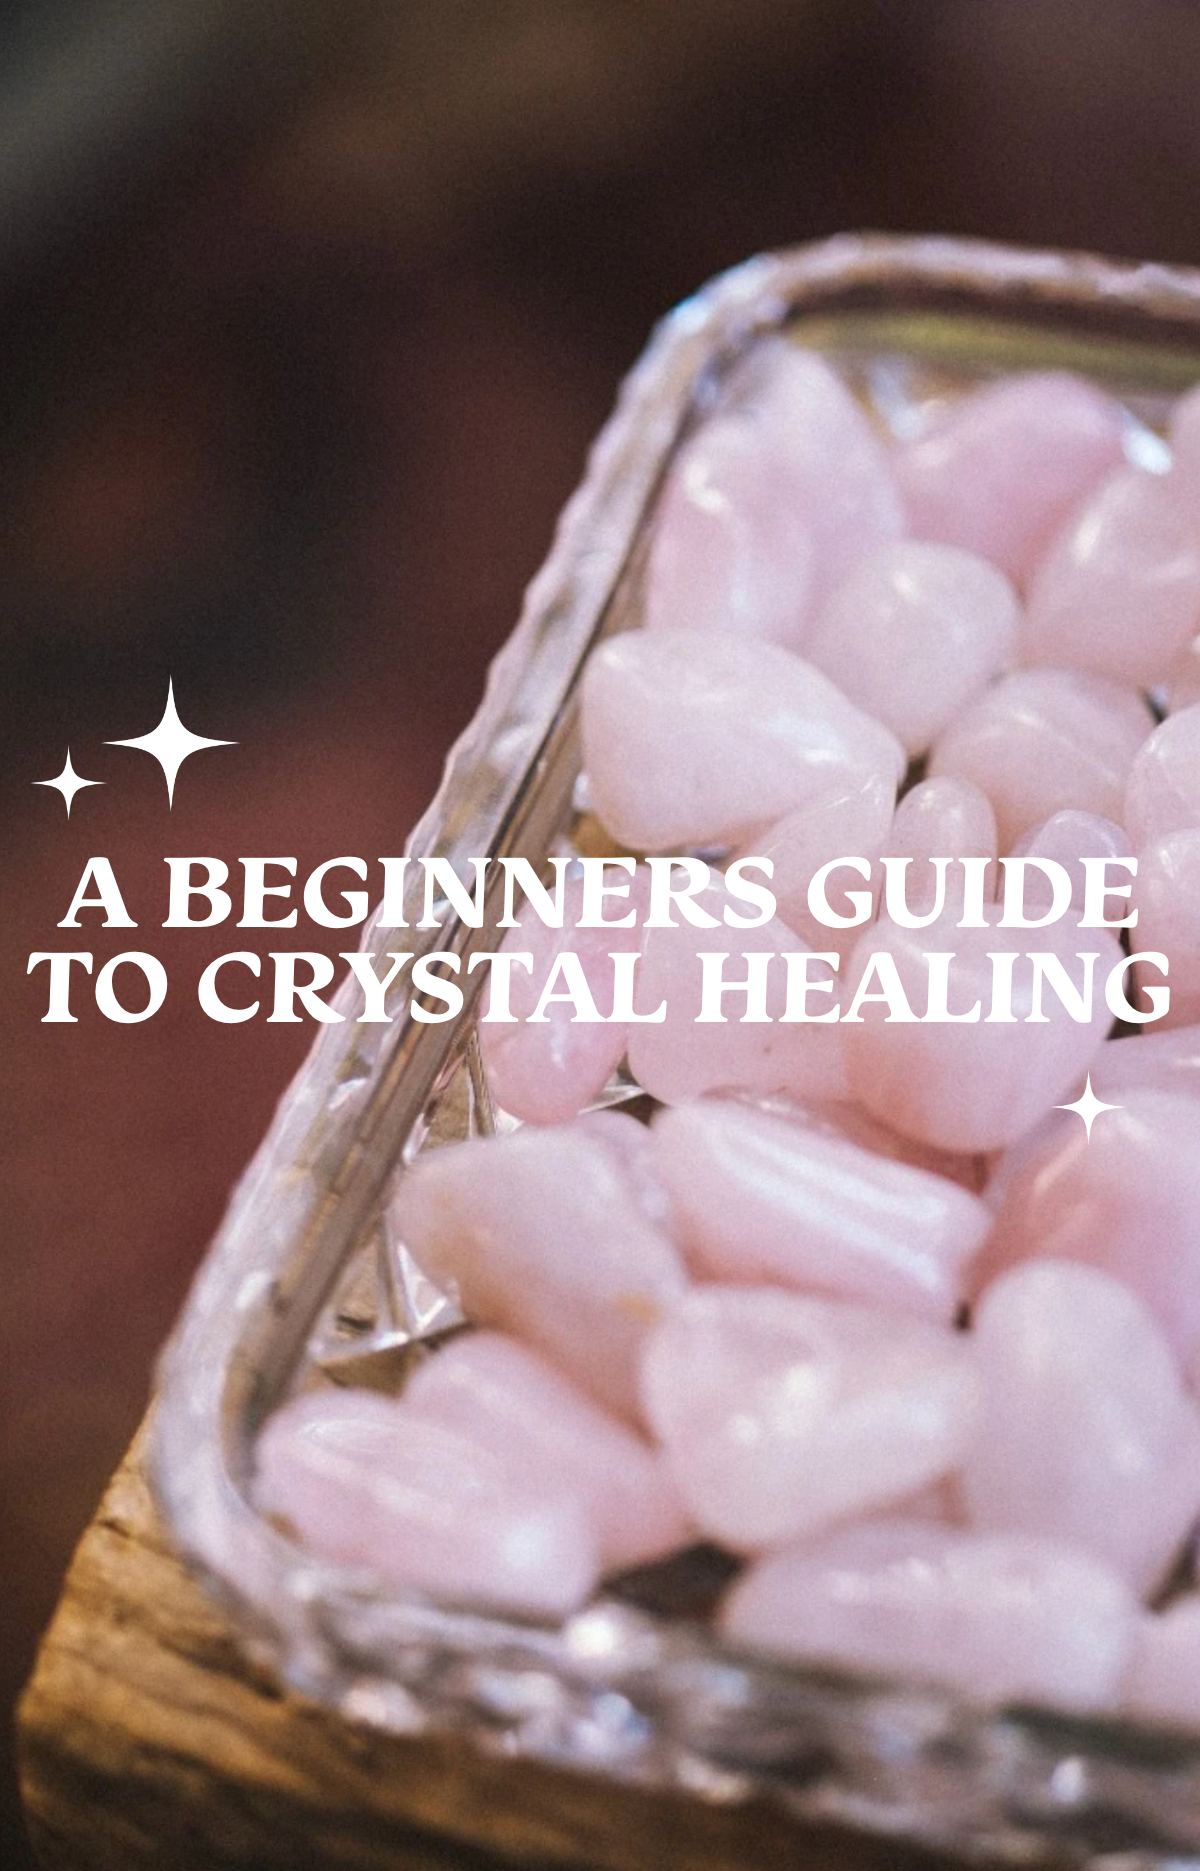 A beginners guide to crystal healing